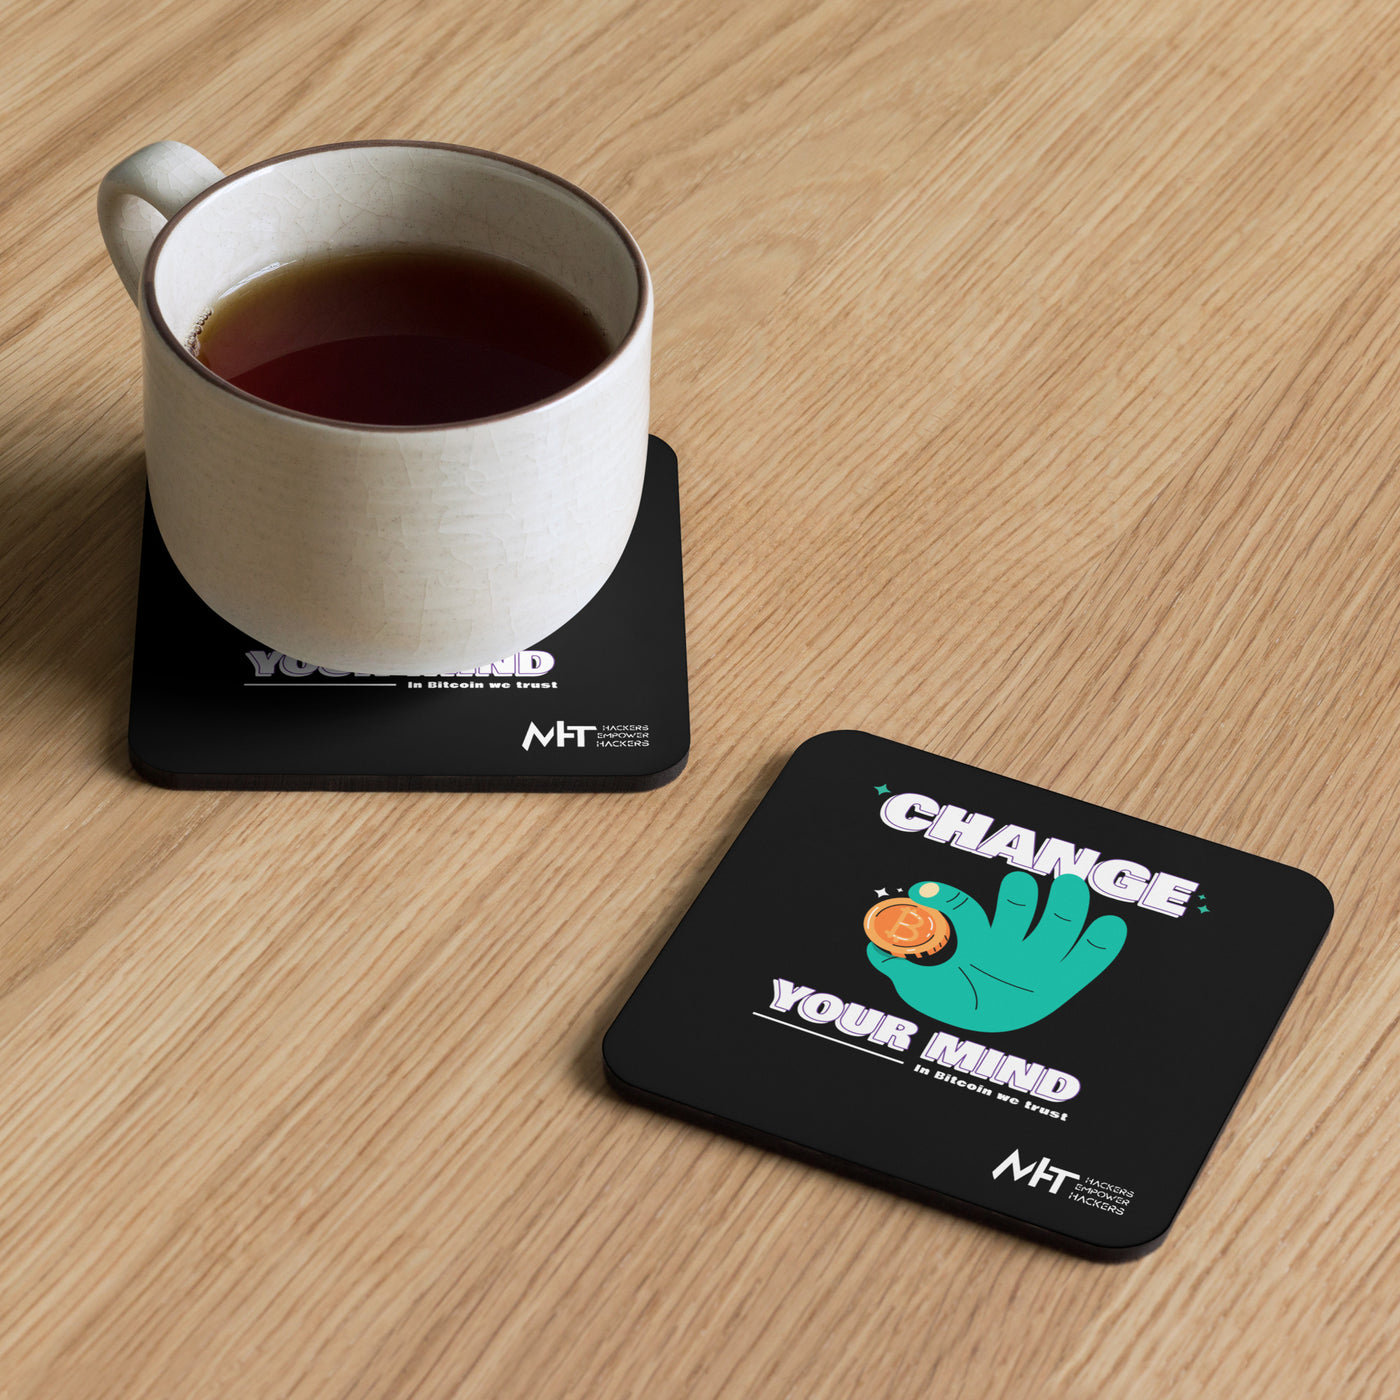 Change your mind in Bitcoin we Trust - Cork-back coaster